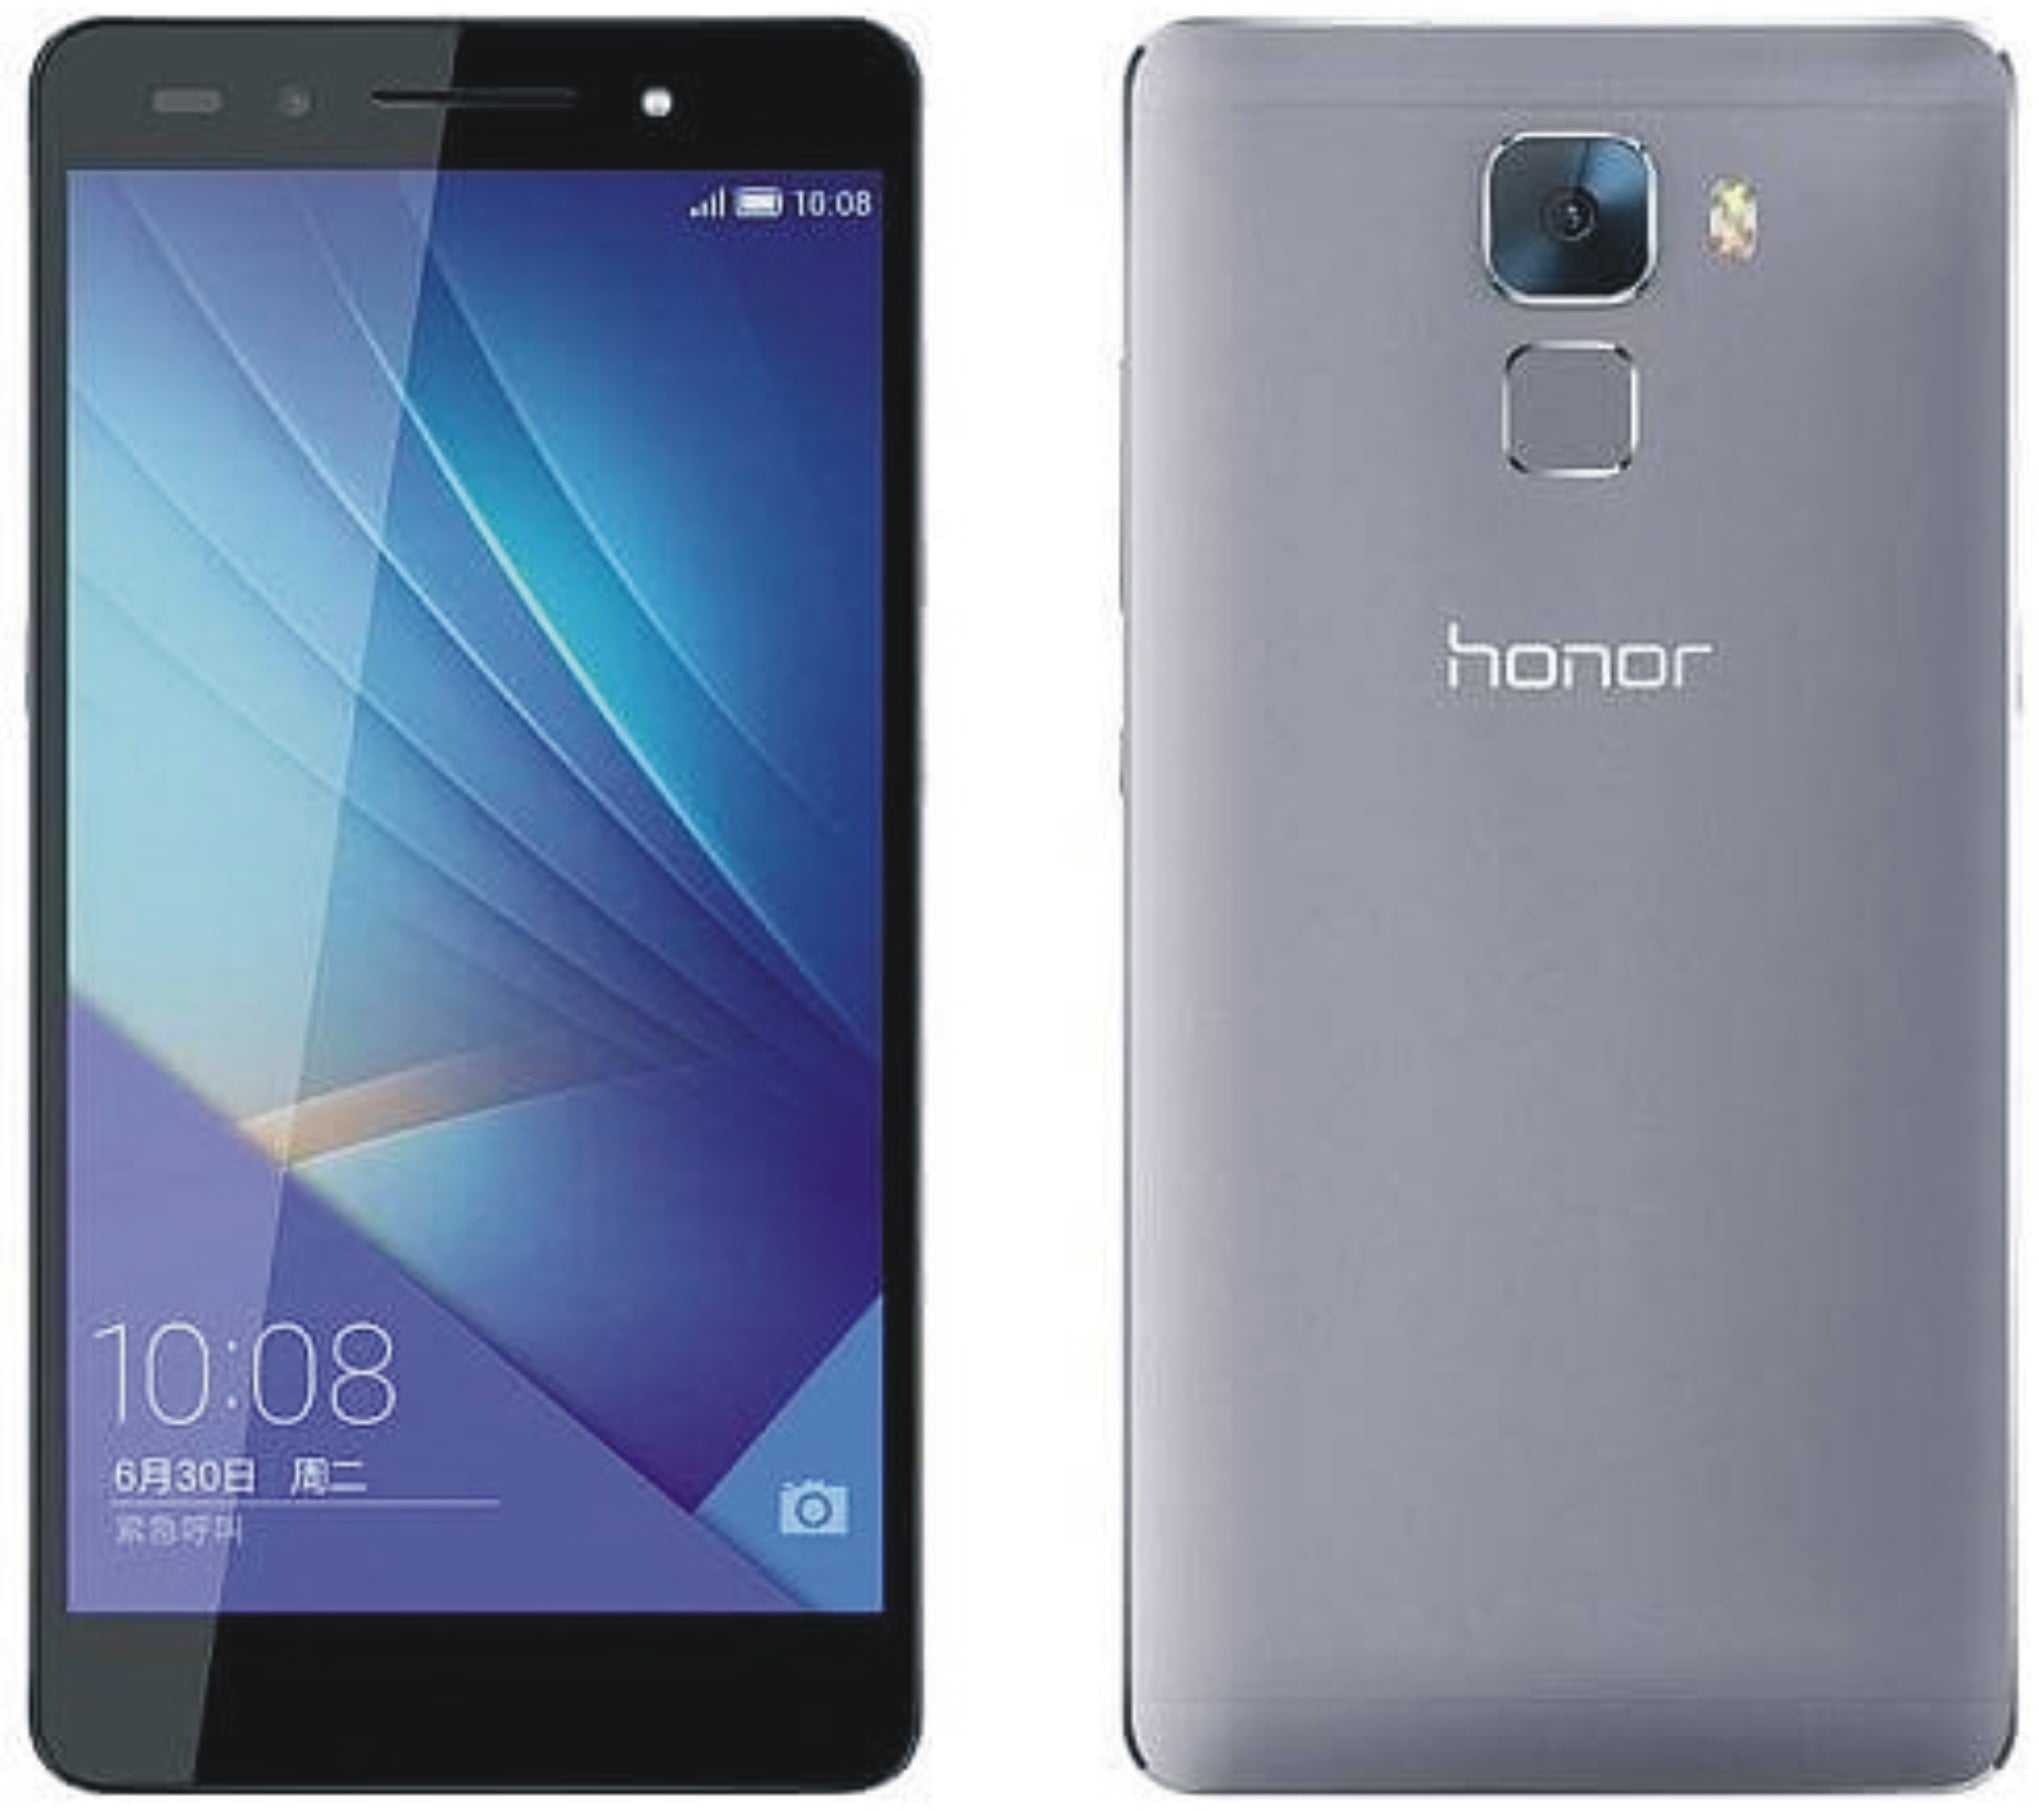 Huawei Honor 5X built with strong Camera Specs will rule the market